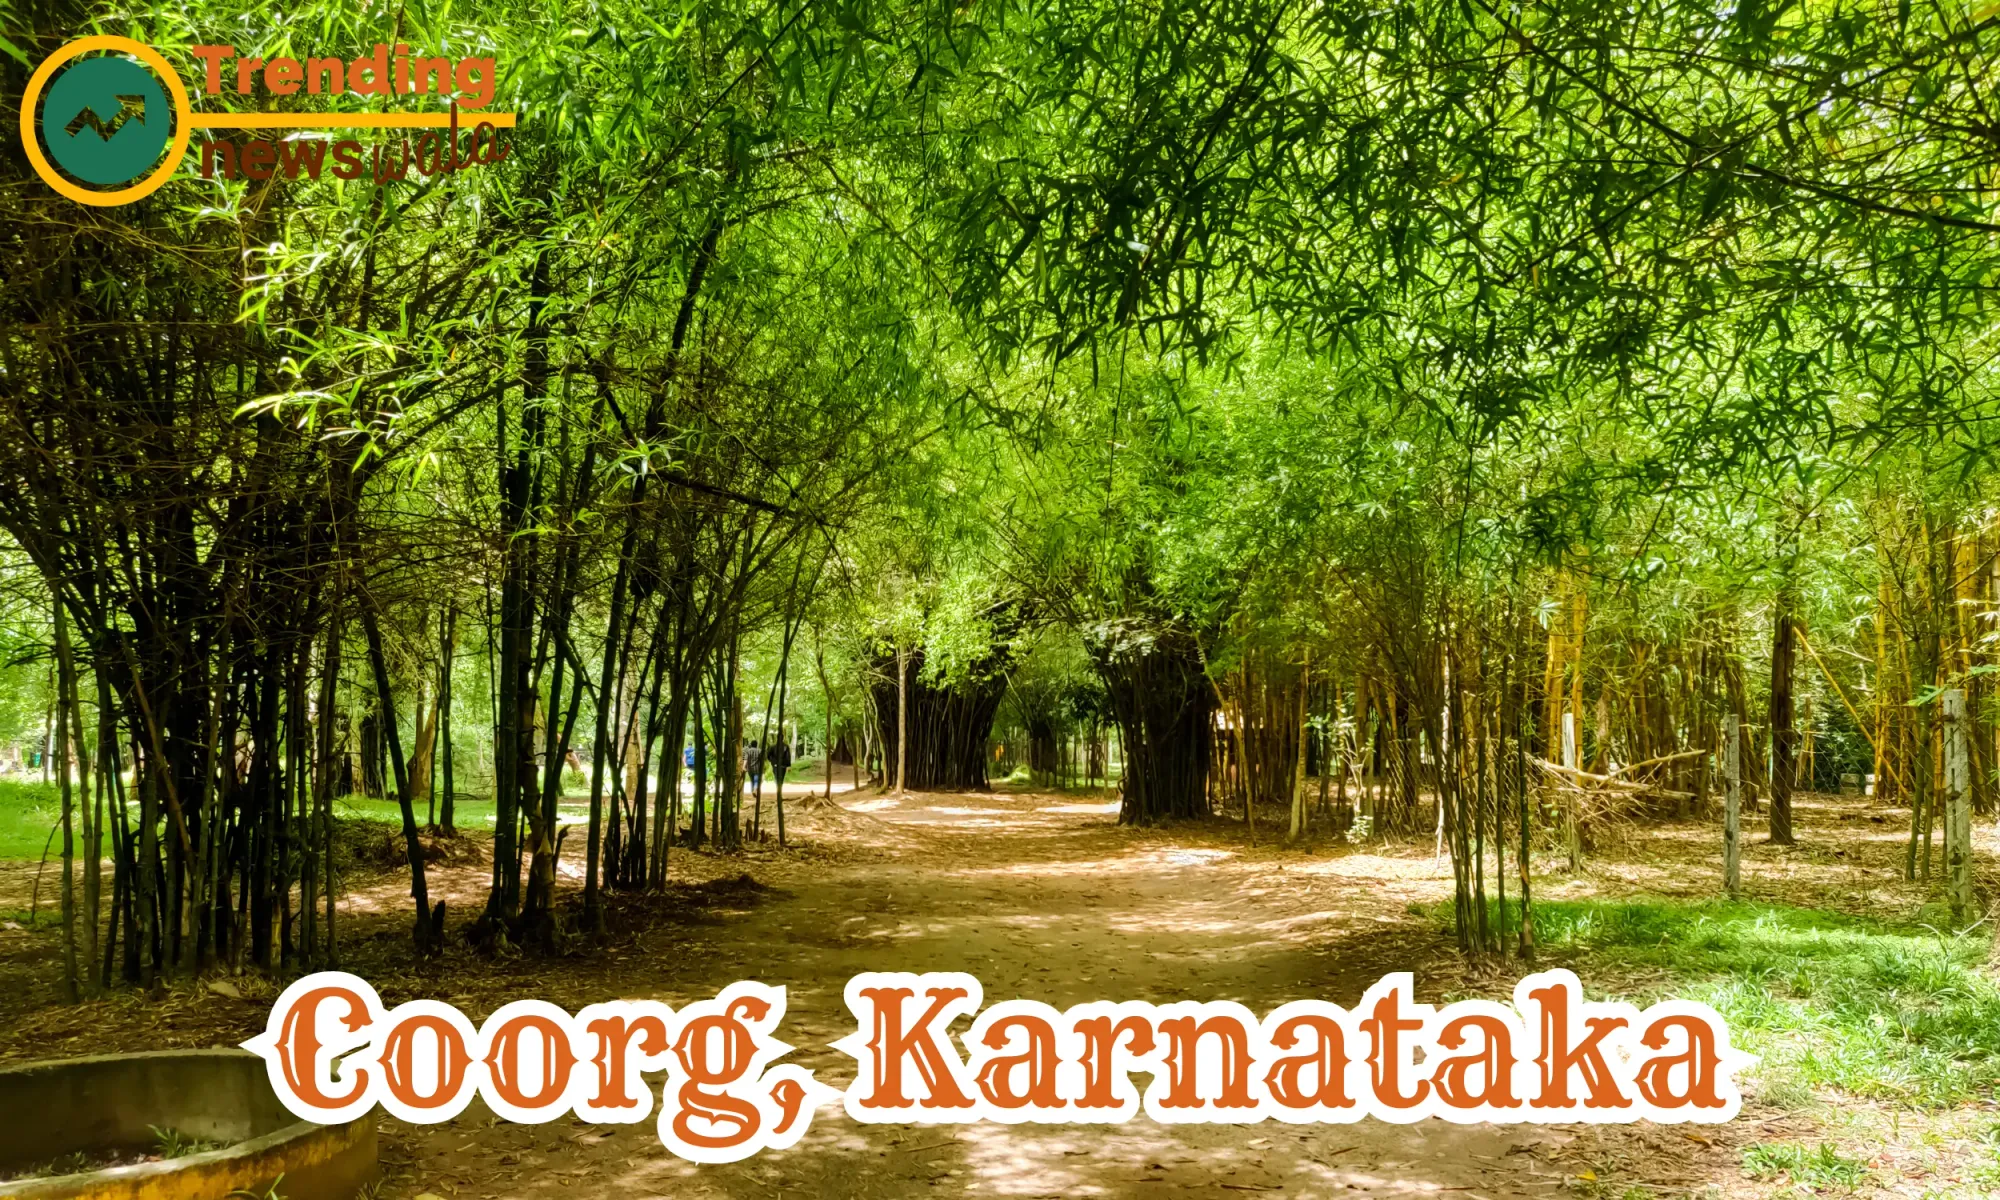 Coorg, officially known as Kodagu, is a picturesque hill station